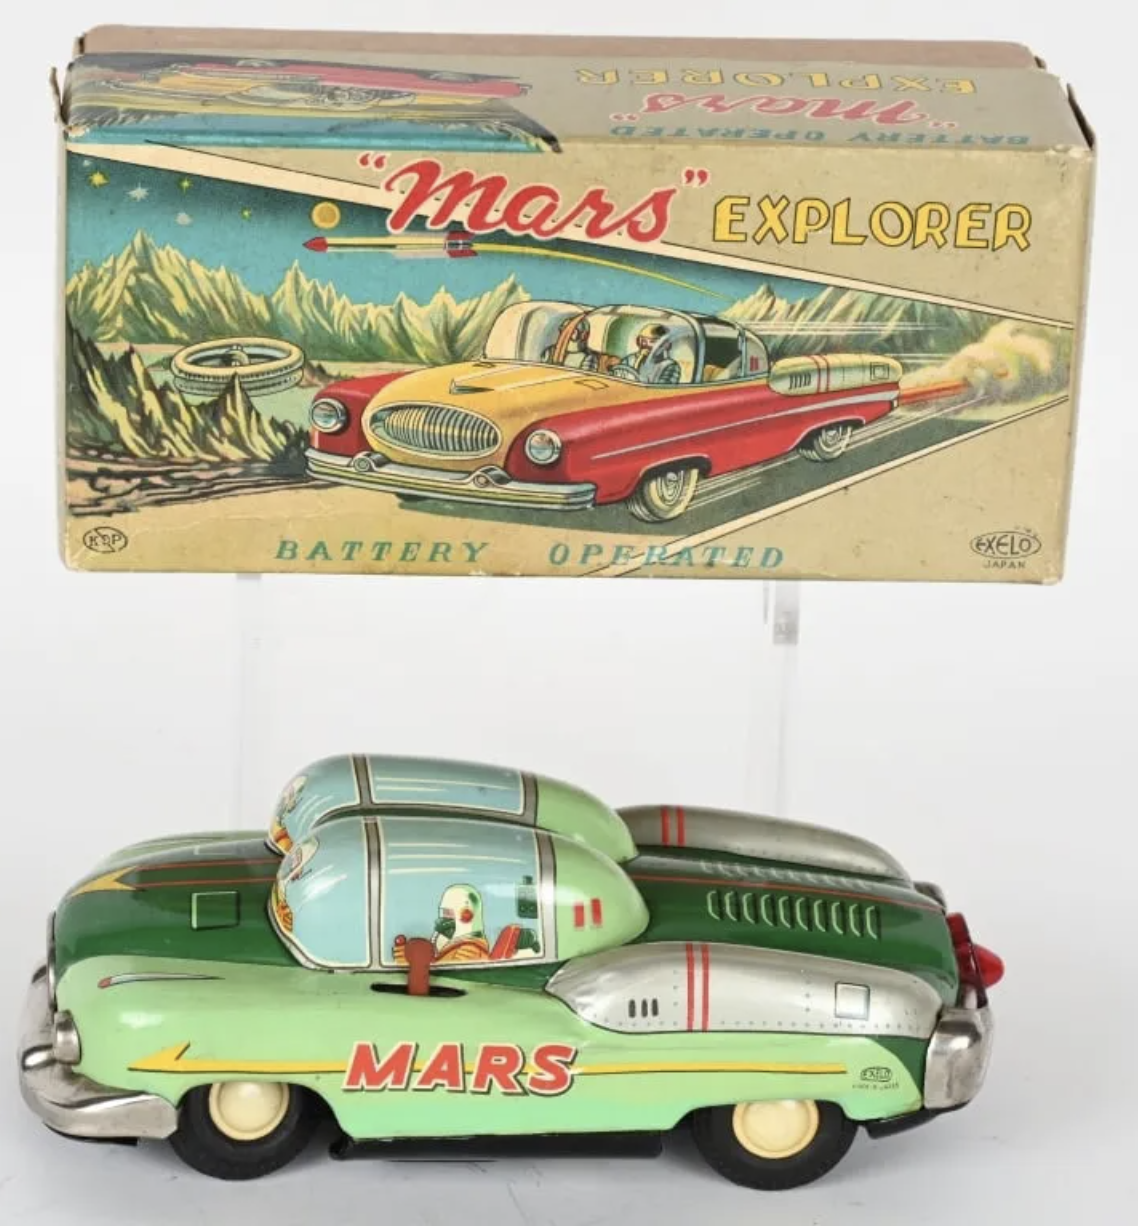 Early Japanese tin toys stole the show at Milestone&#8217;s $1.3M sale